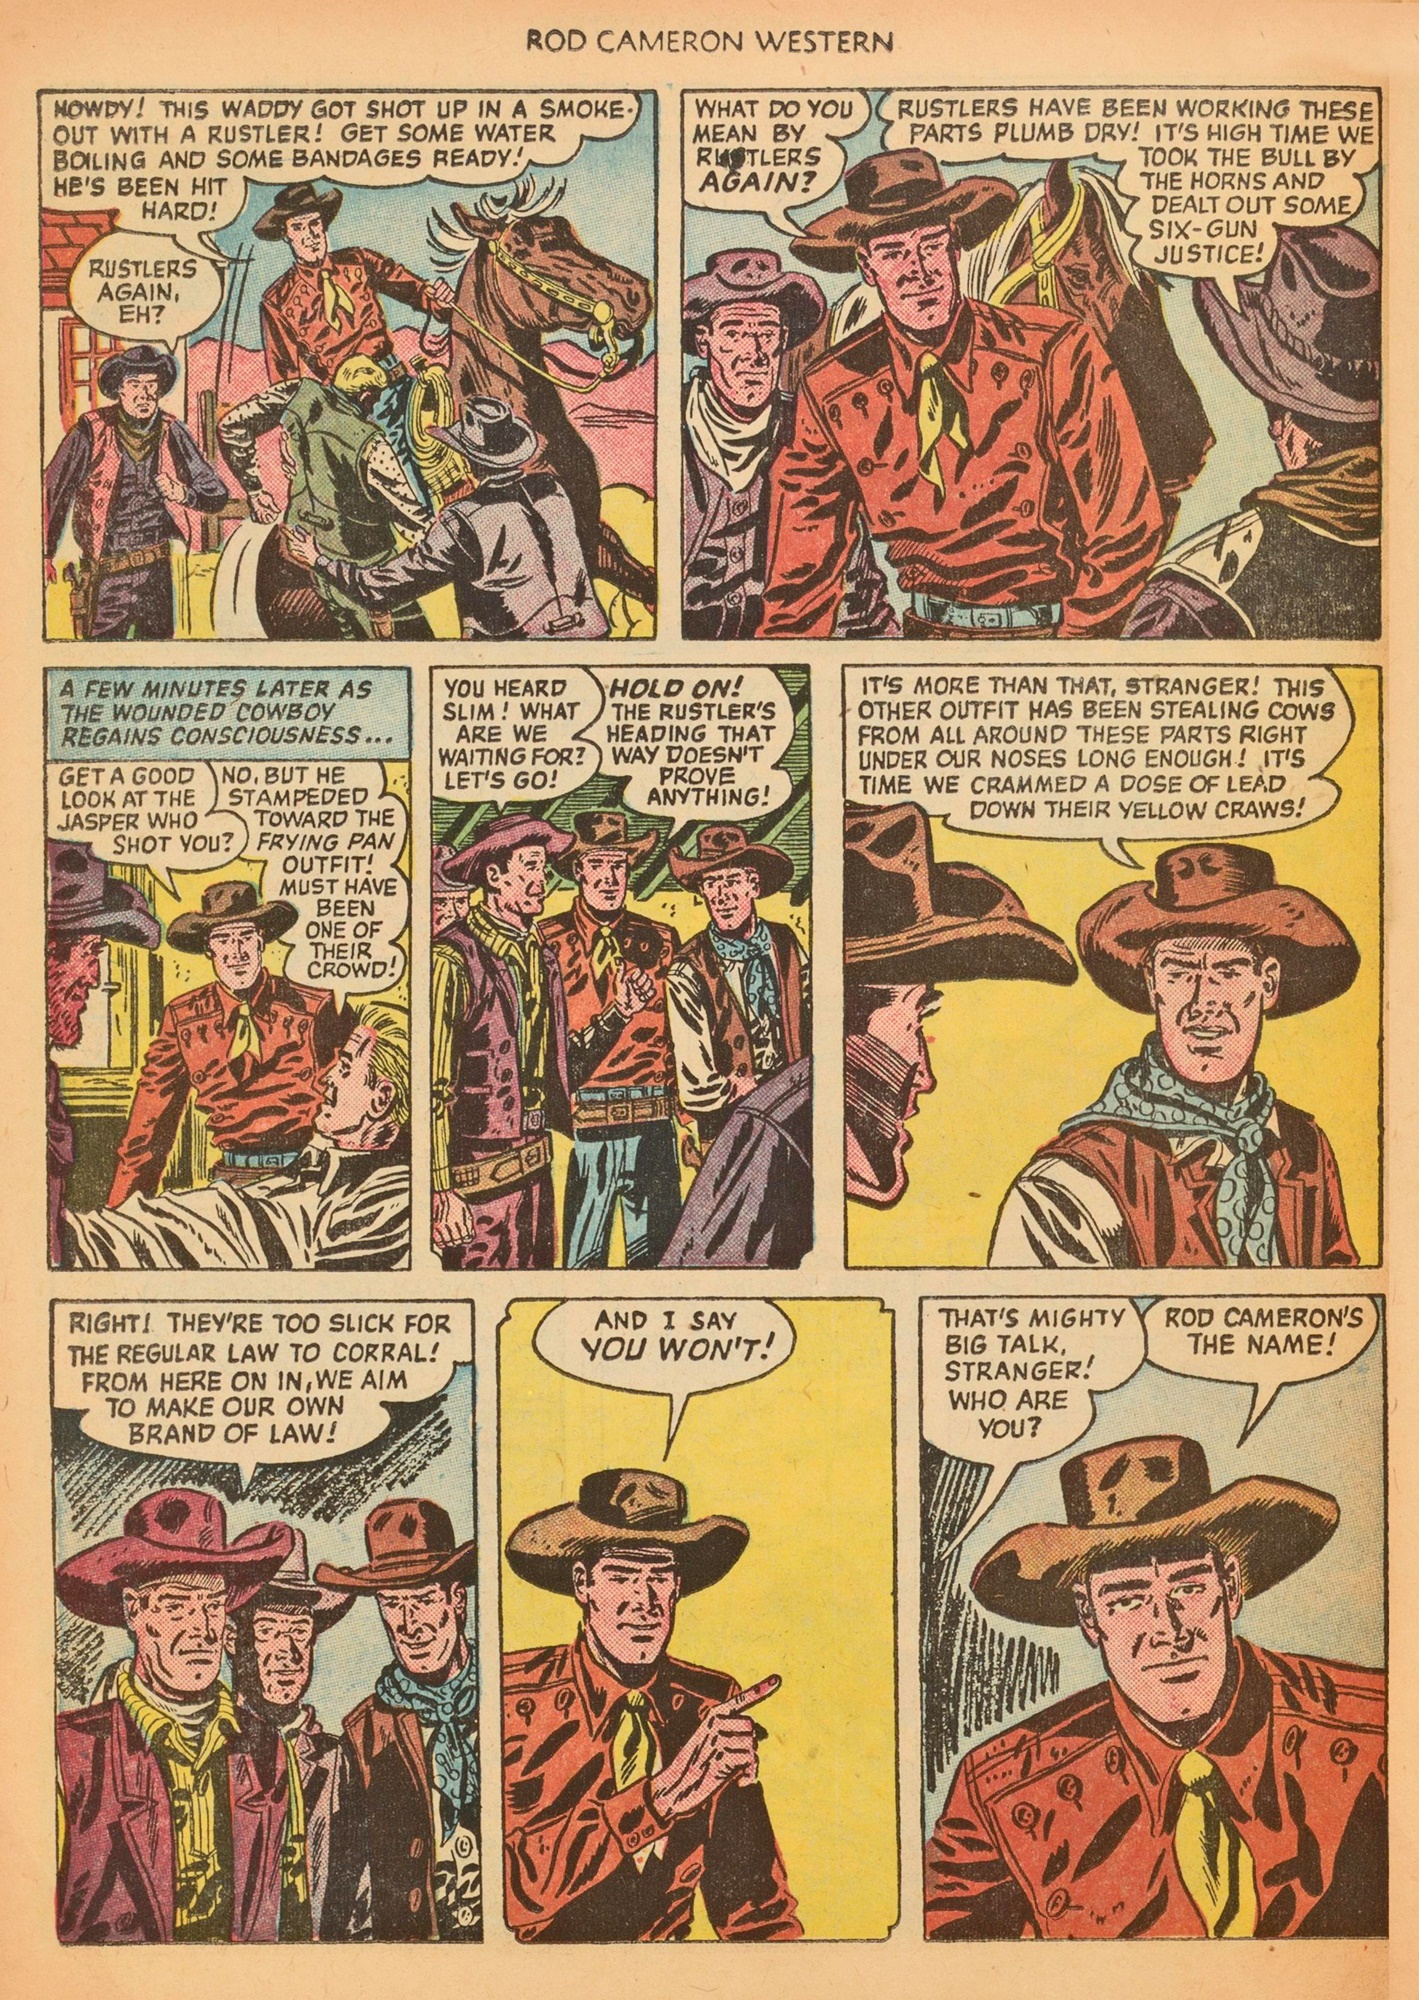 Read online Rod Cameron Western comic -  Issue #9 - 26